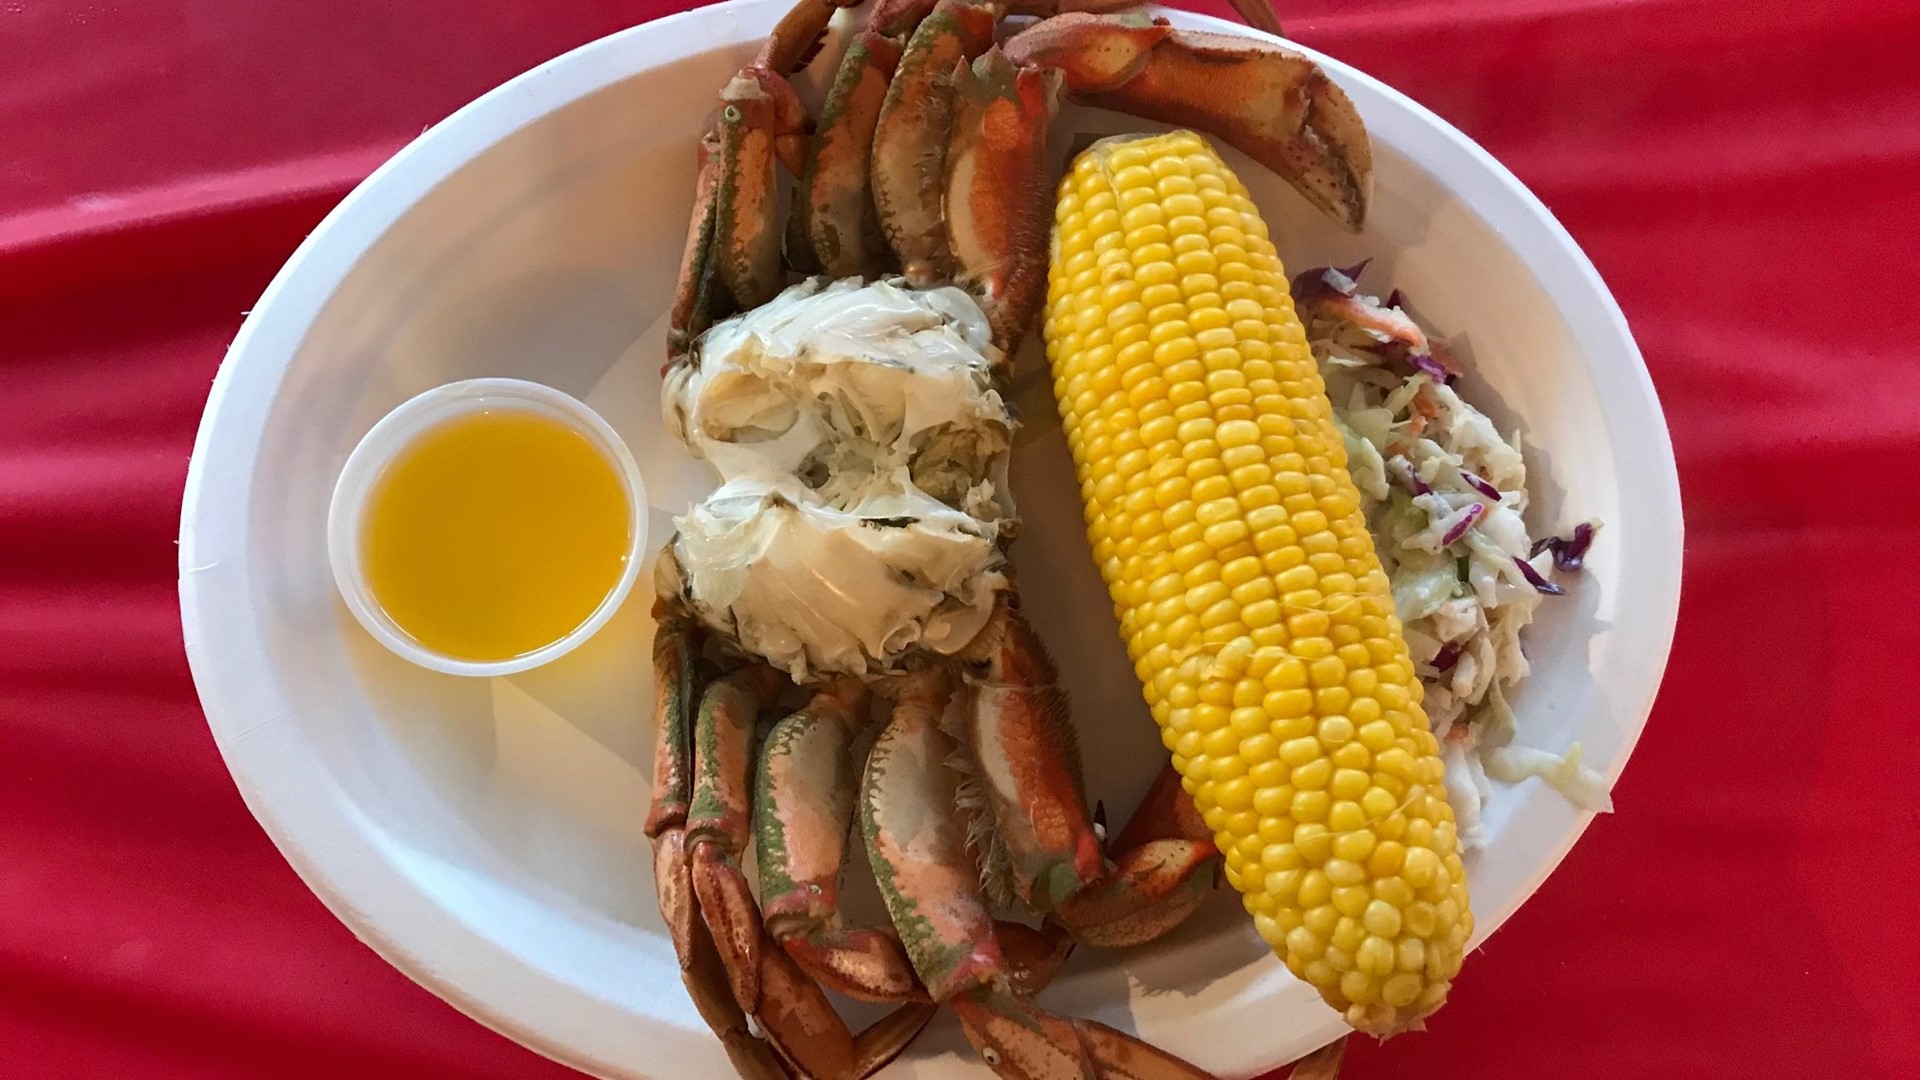 It's a crustacean celebration at Dungeness Crab and Seafood Fest in